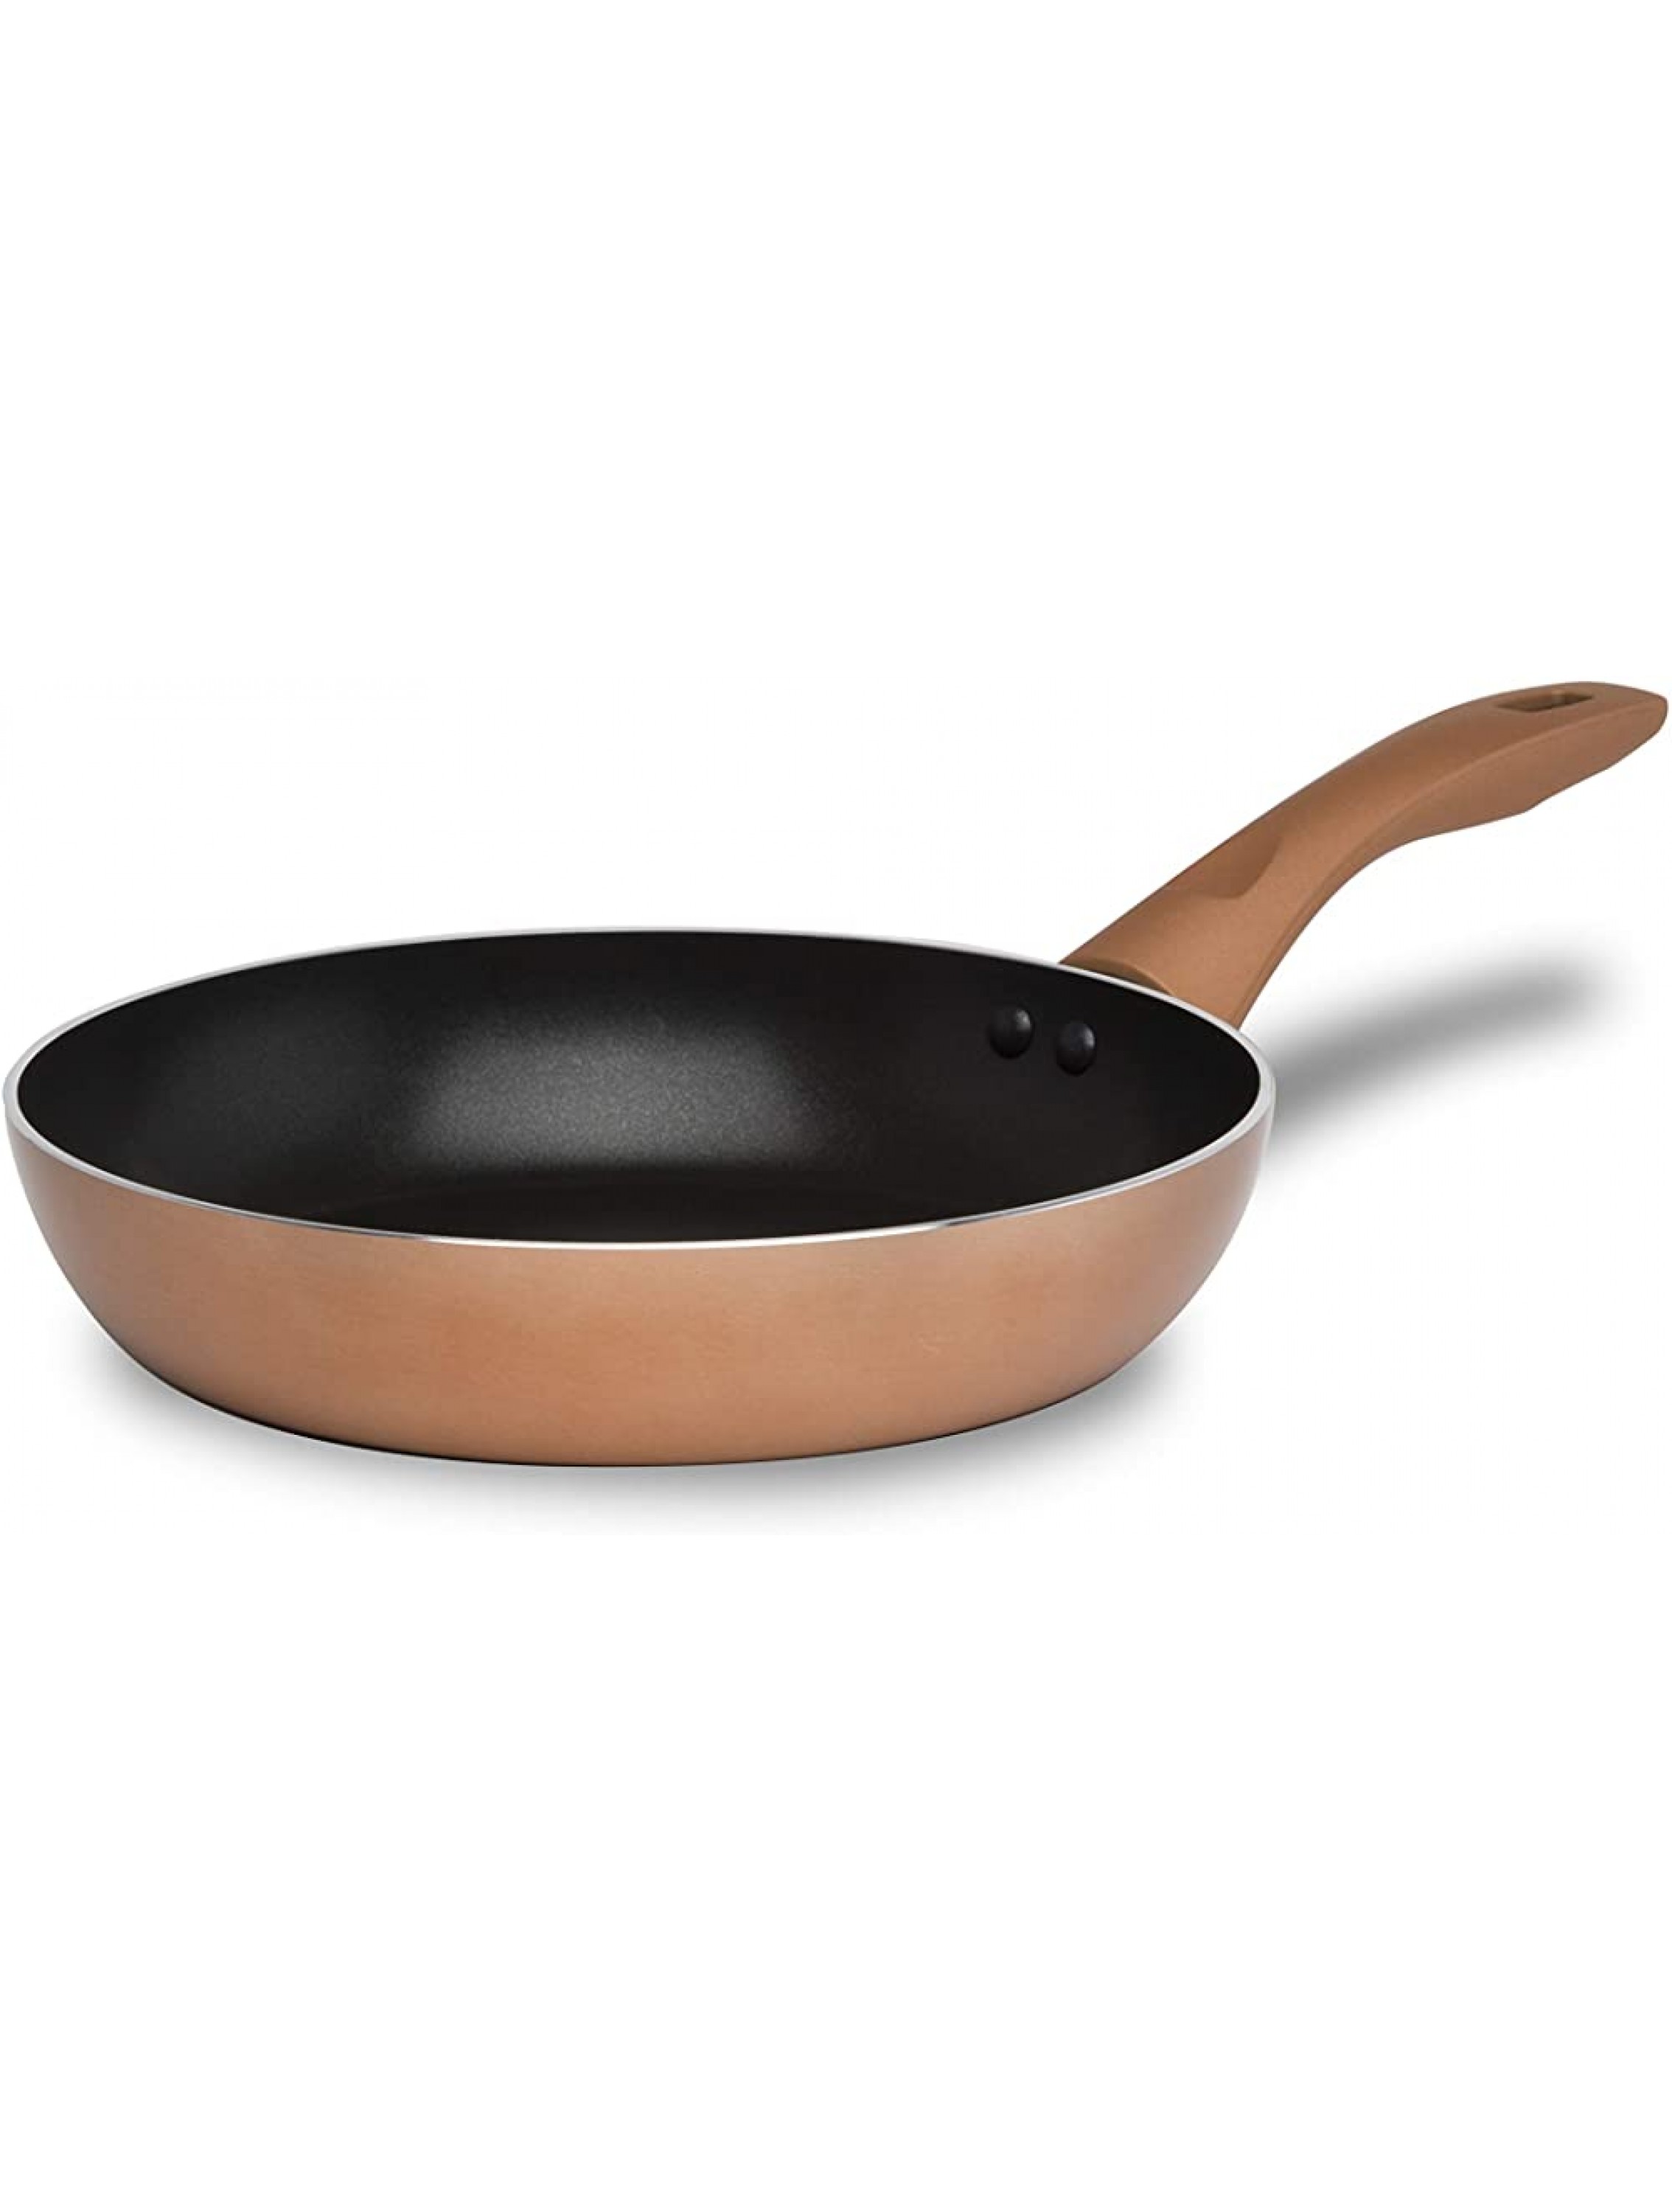 Cooking Light Cookware Dishwasher Safe Scratch Resistant with Easy Food Release Interior Cool Touch Handle and Even Heating Base 9.5in Fry Pan Copper - BG8V3RW2G